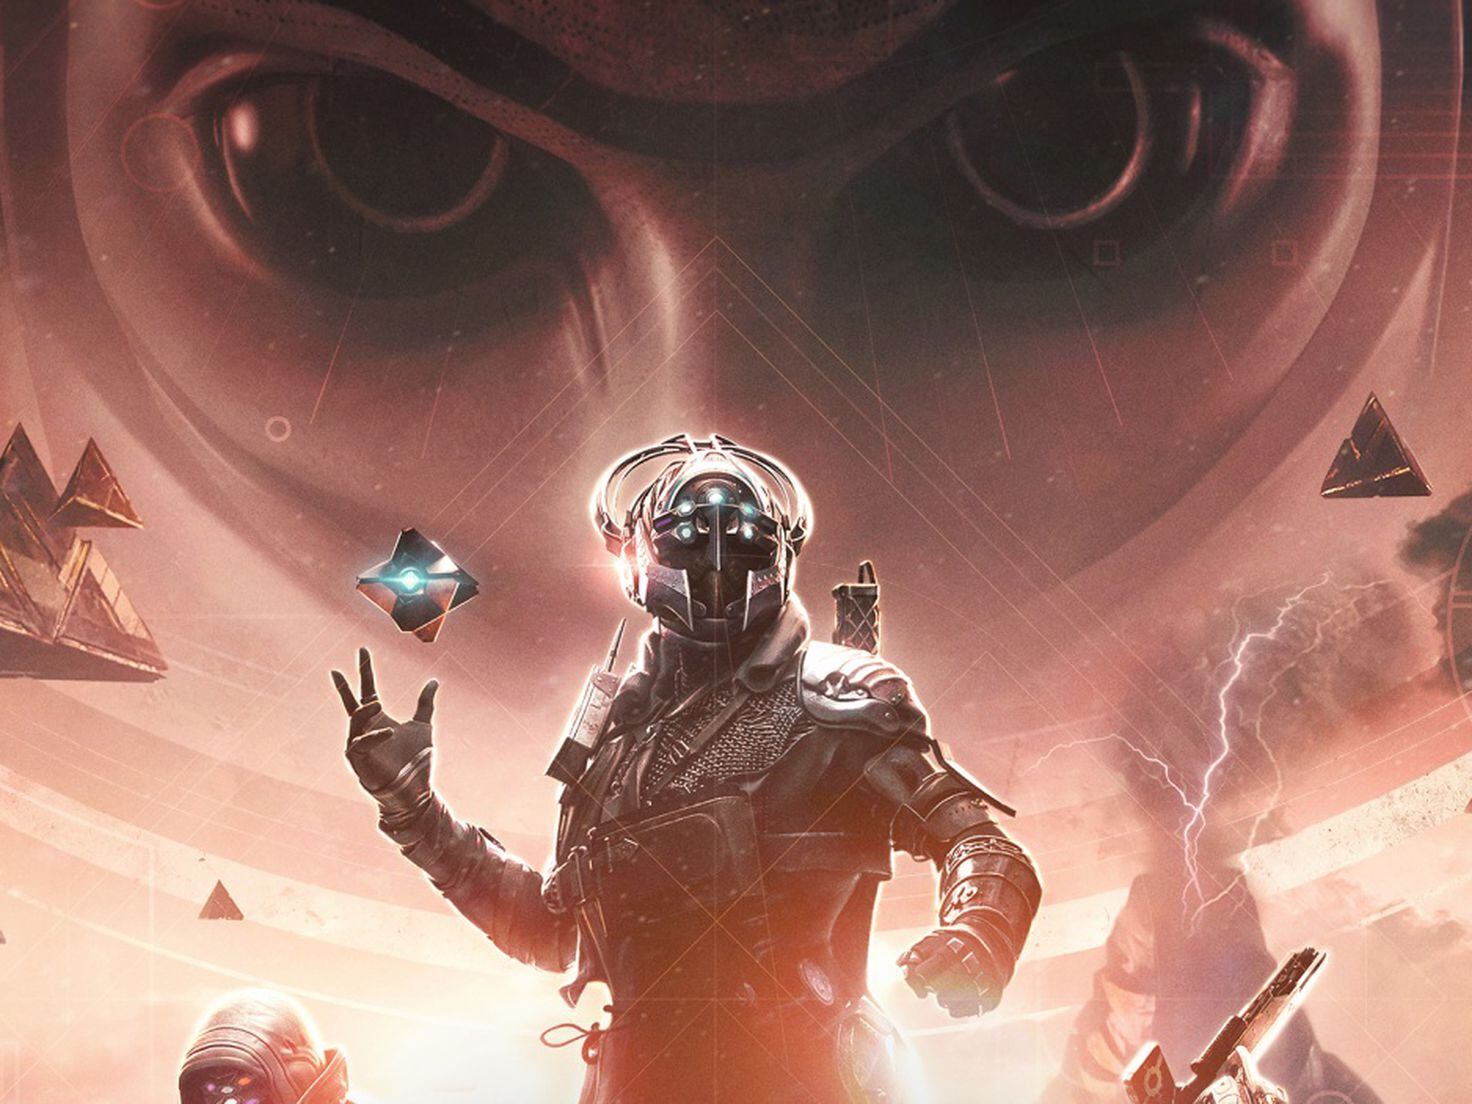 s First Game Is Called Crucible And It's Free-to-play On Steam –